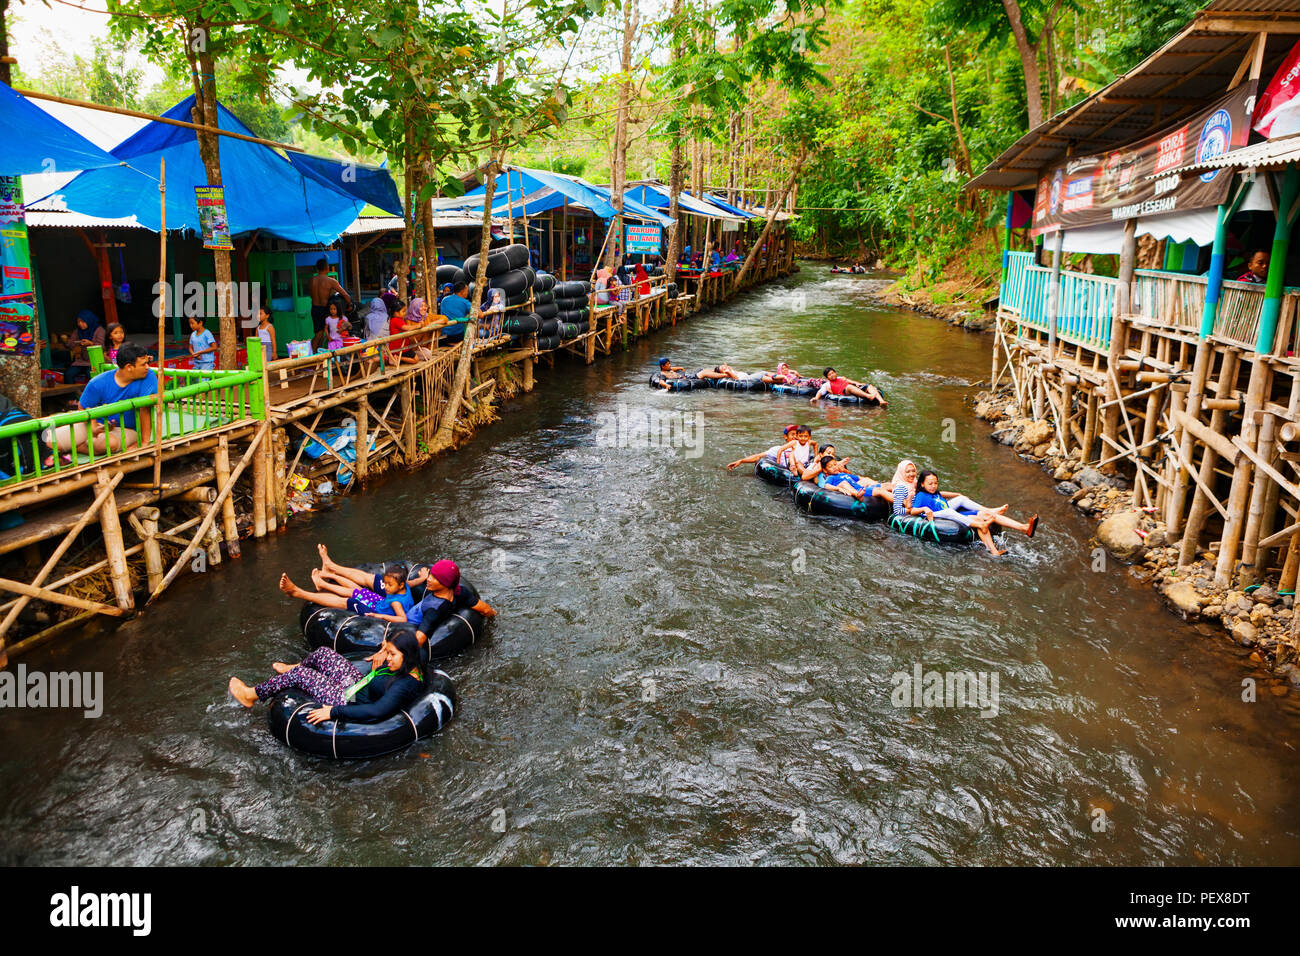 East Java, Indonesia - July 11, 2018: Sumber Maron - natural spring water spa with funny rafting on inflatable rings Popular place to visit for family Stock Photo